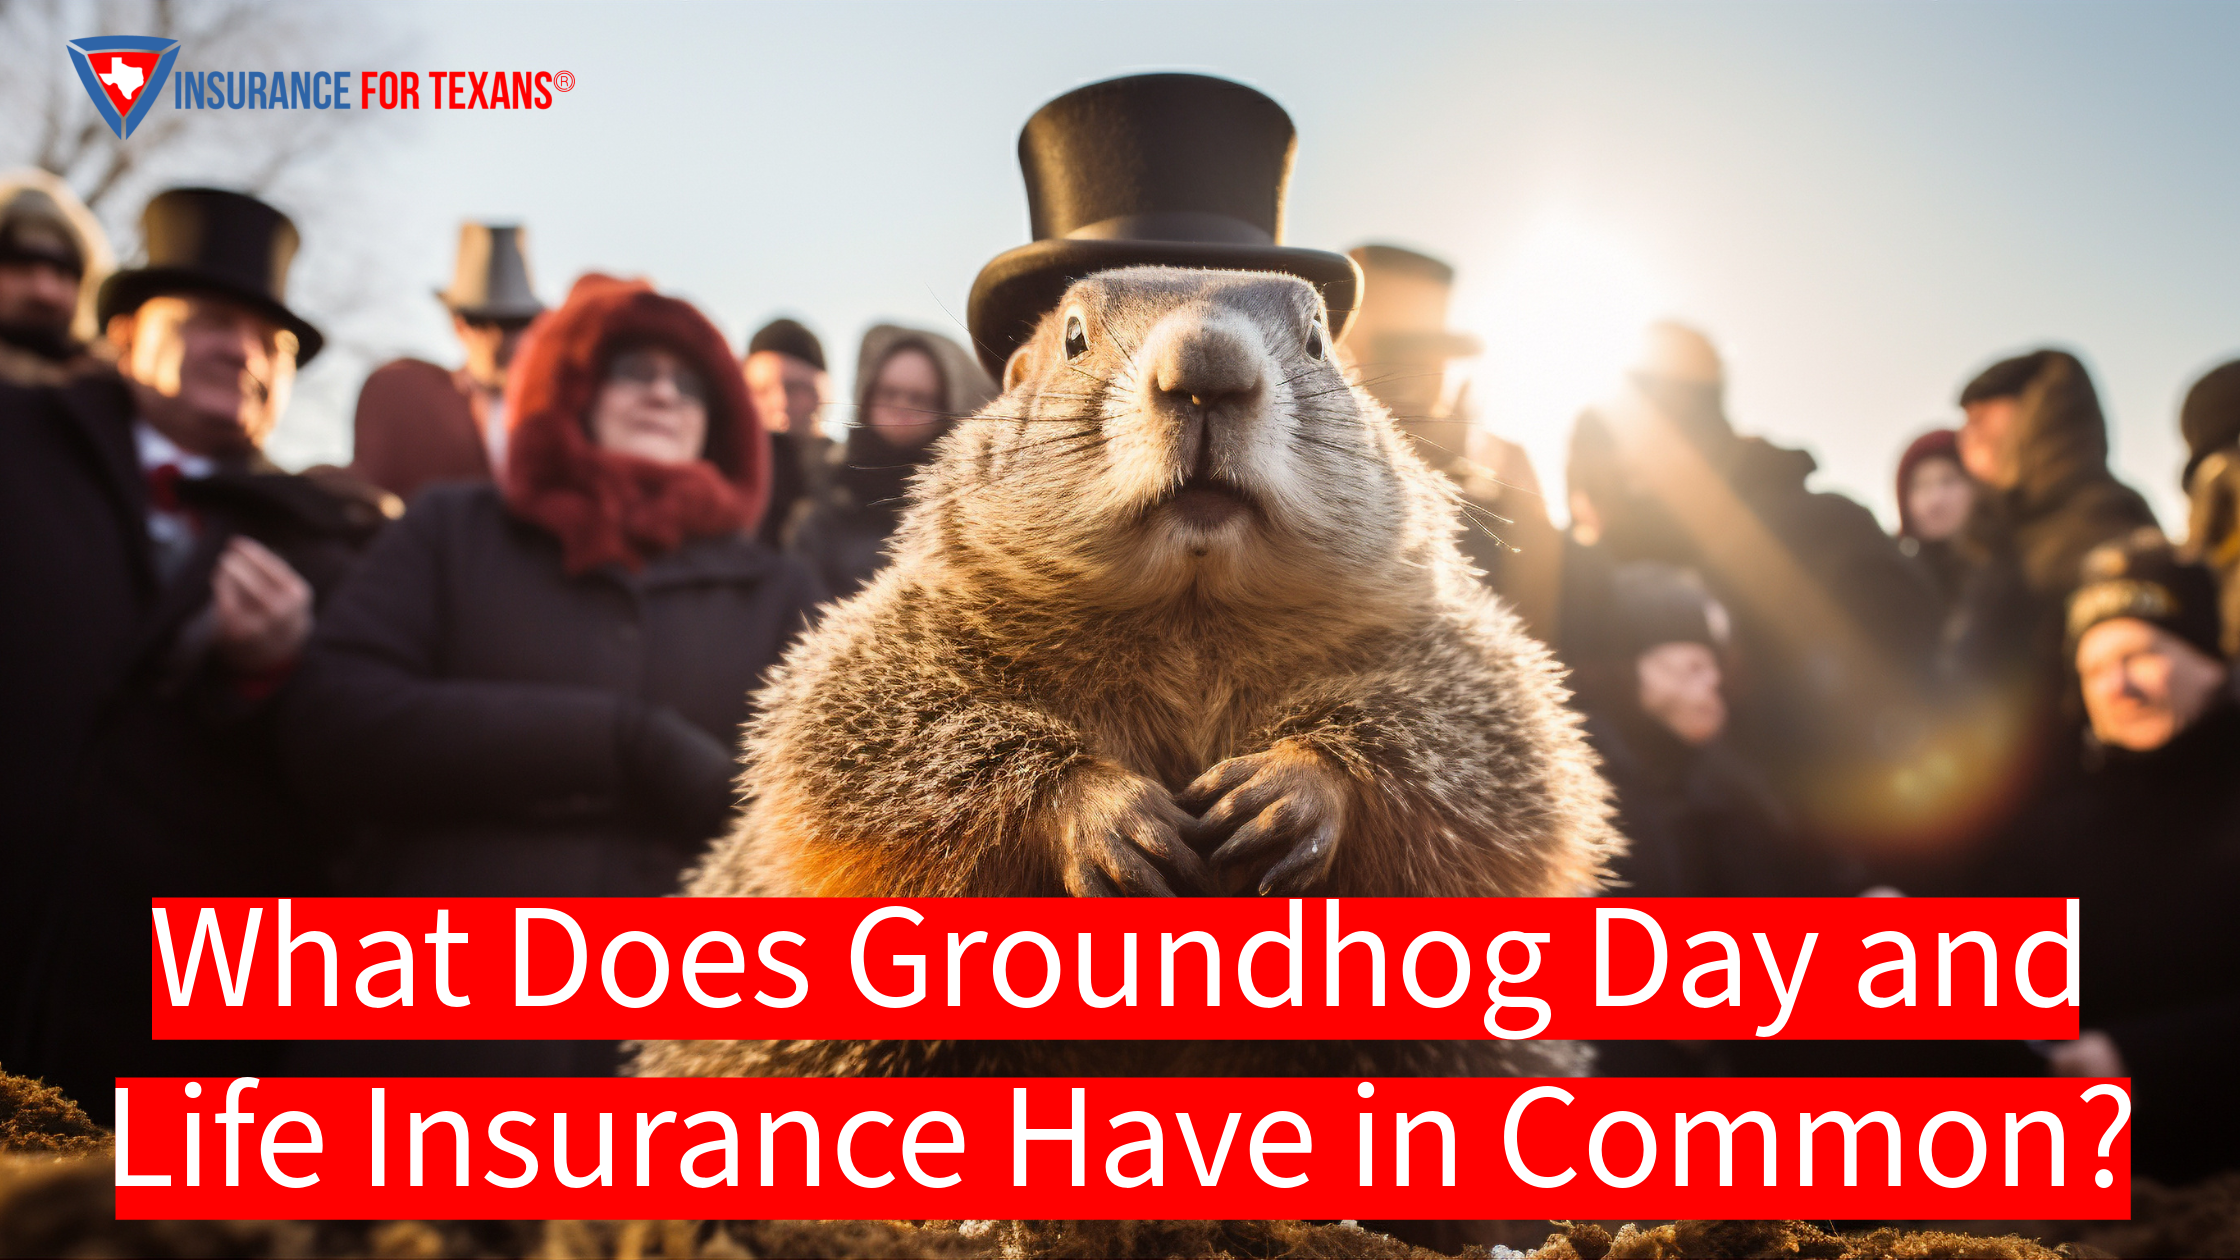 What Does Groundhog Day and Life Insurance Have in Common?